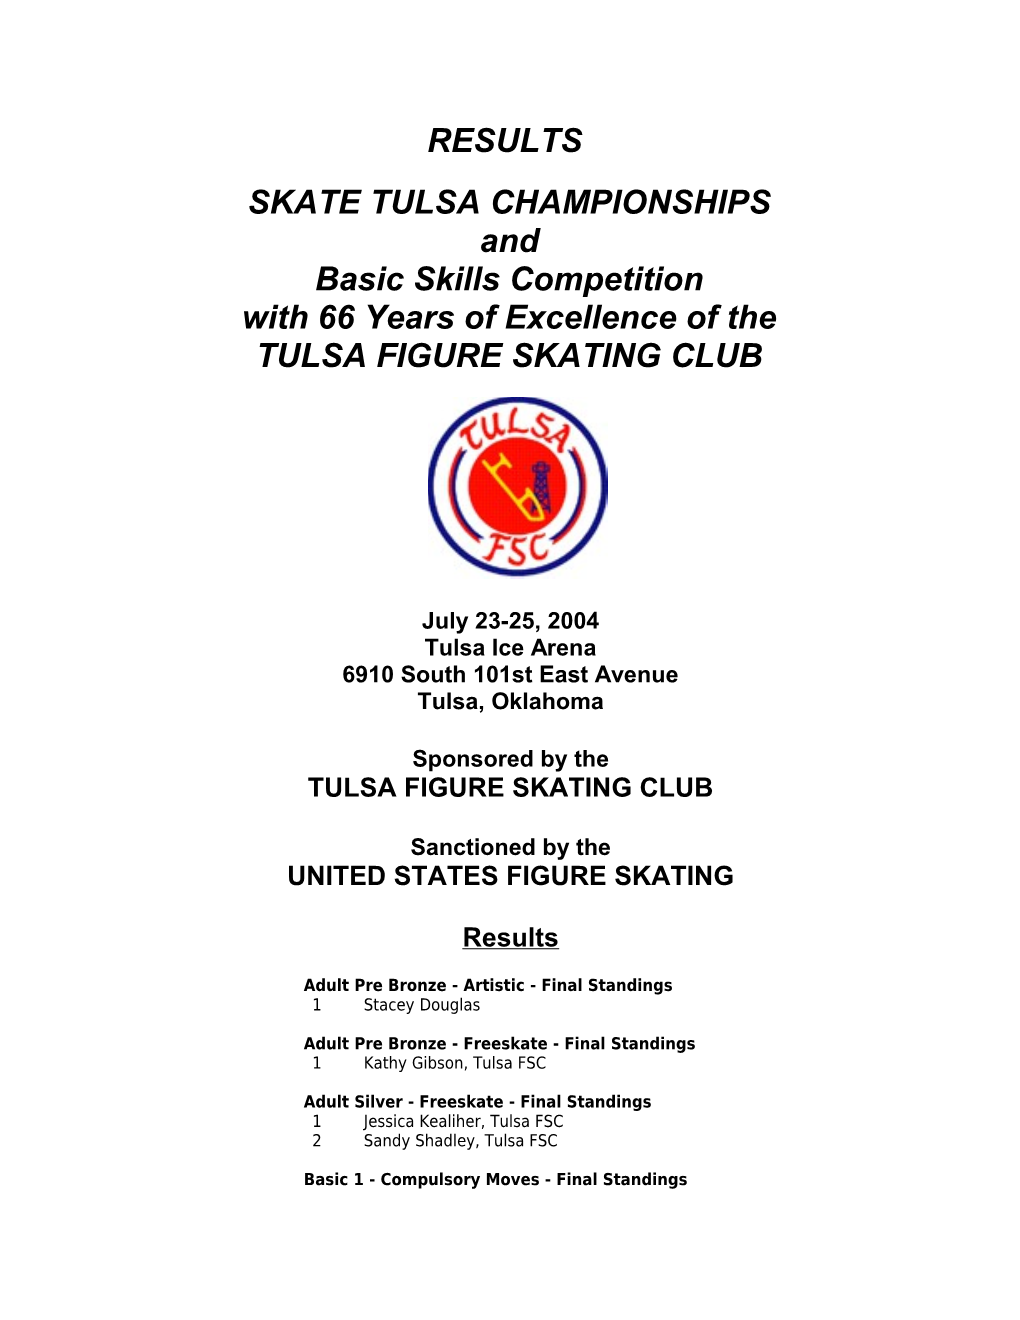 SKATE TULSA CHAMPIONSHIPS and Basic Skills Competition with 66 Years of Excellence Of